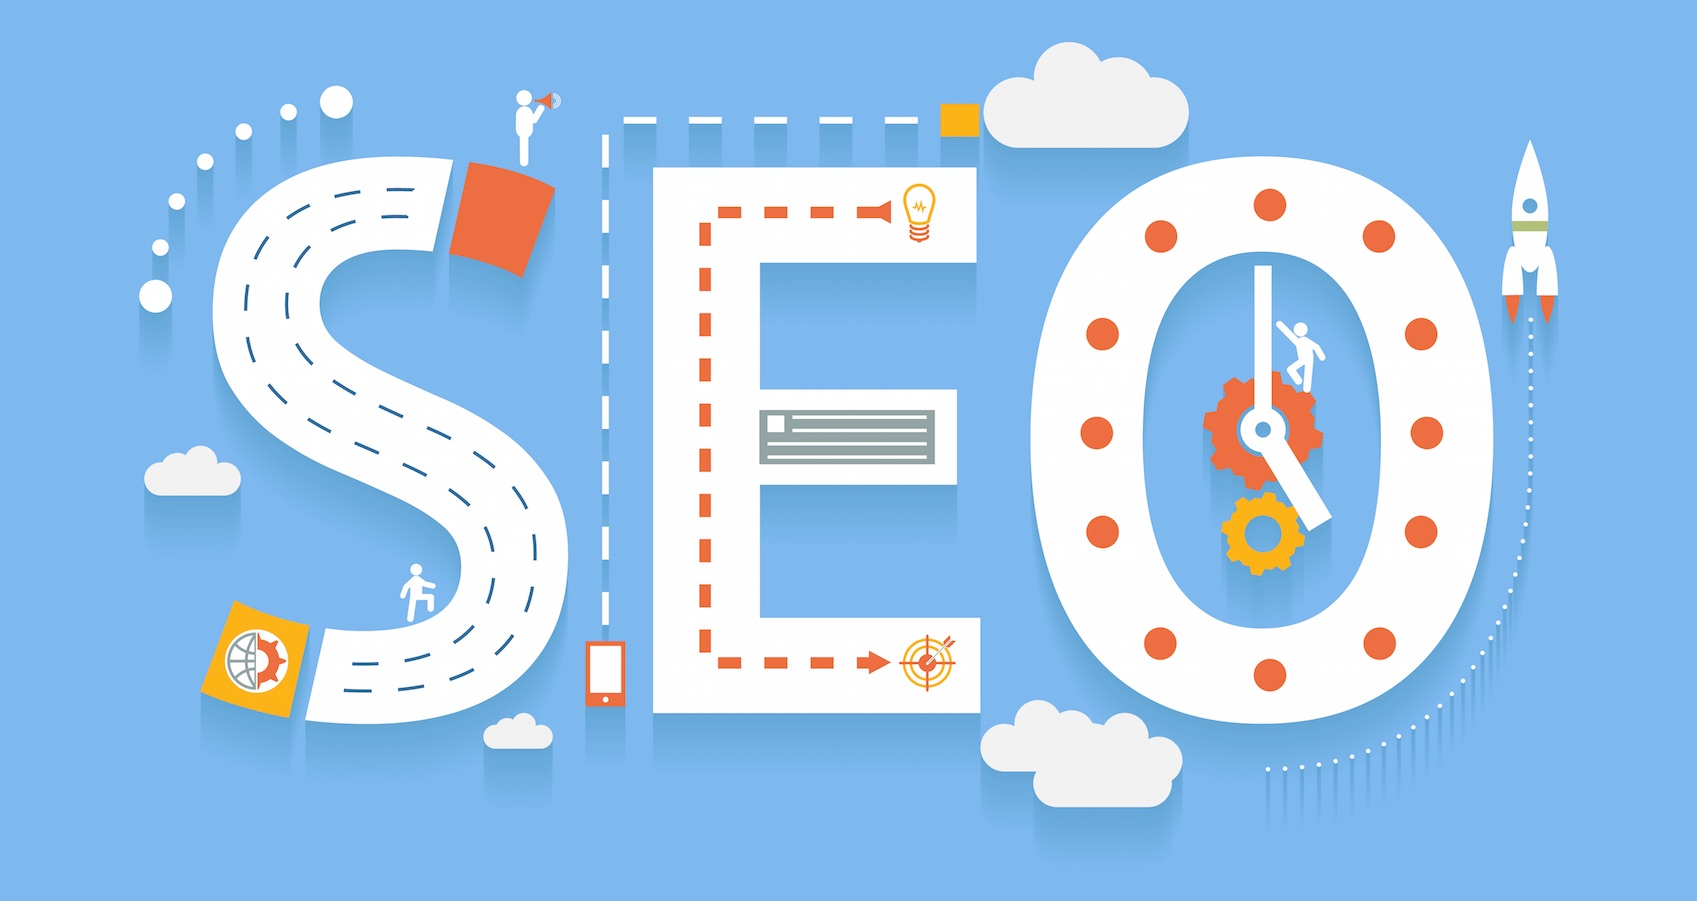 Does Your Business Need An SEO Boost?